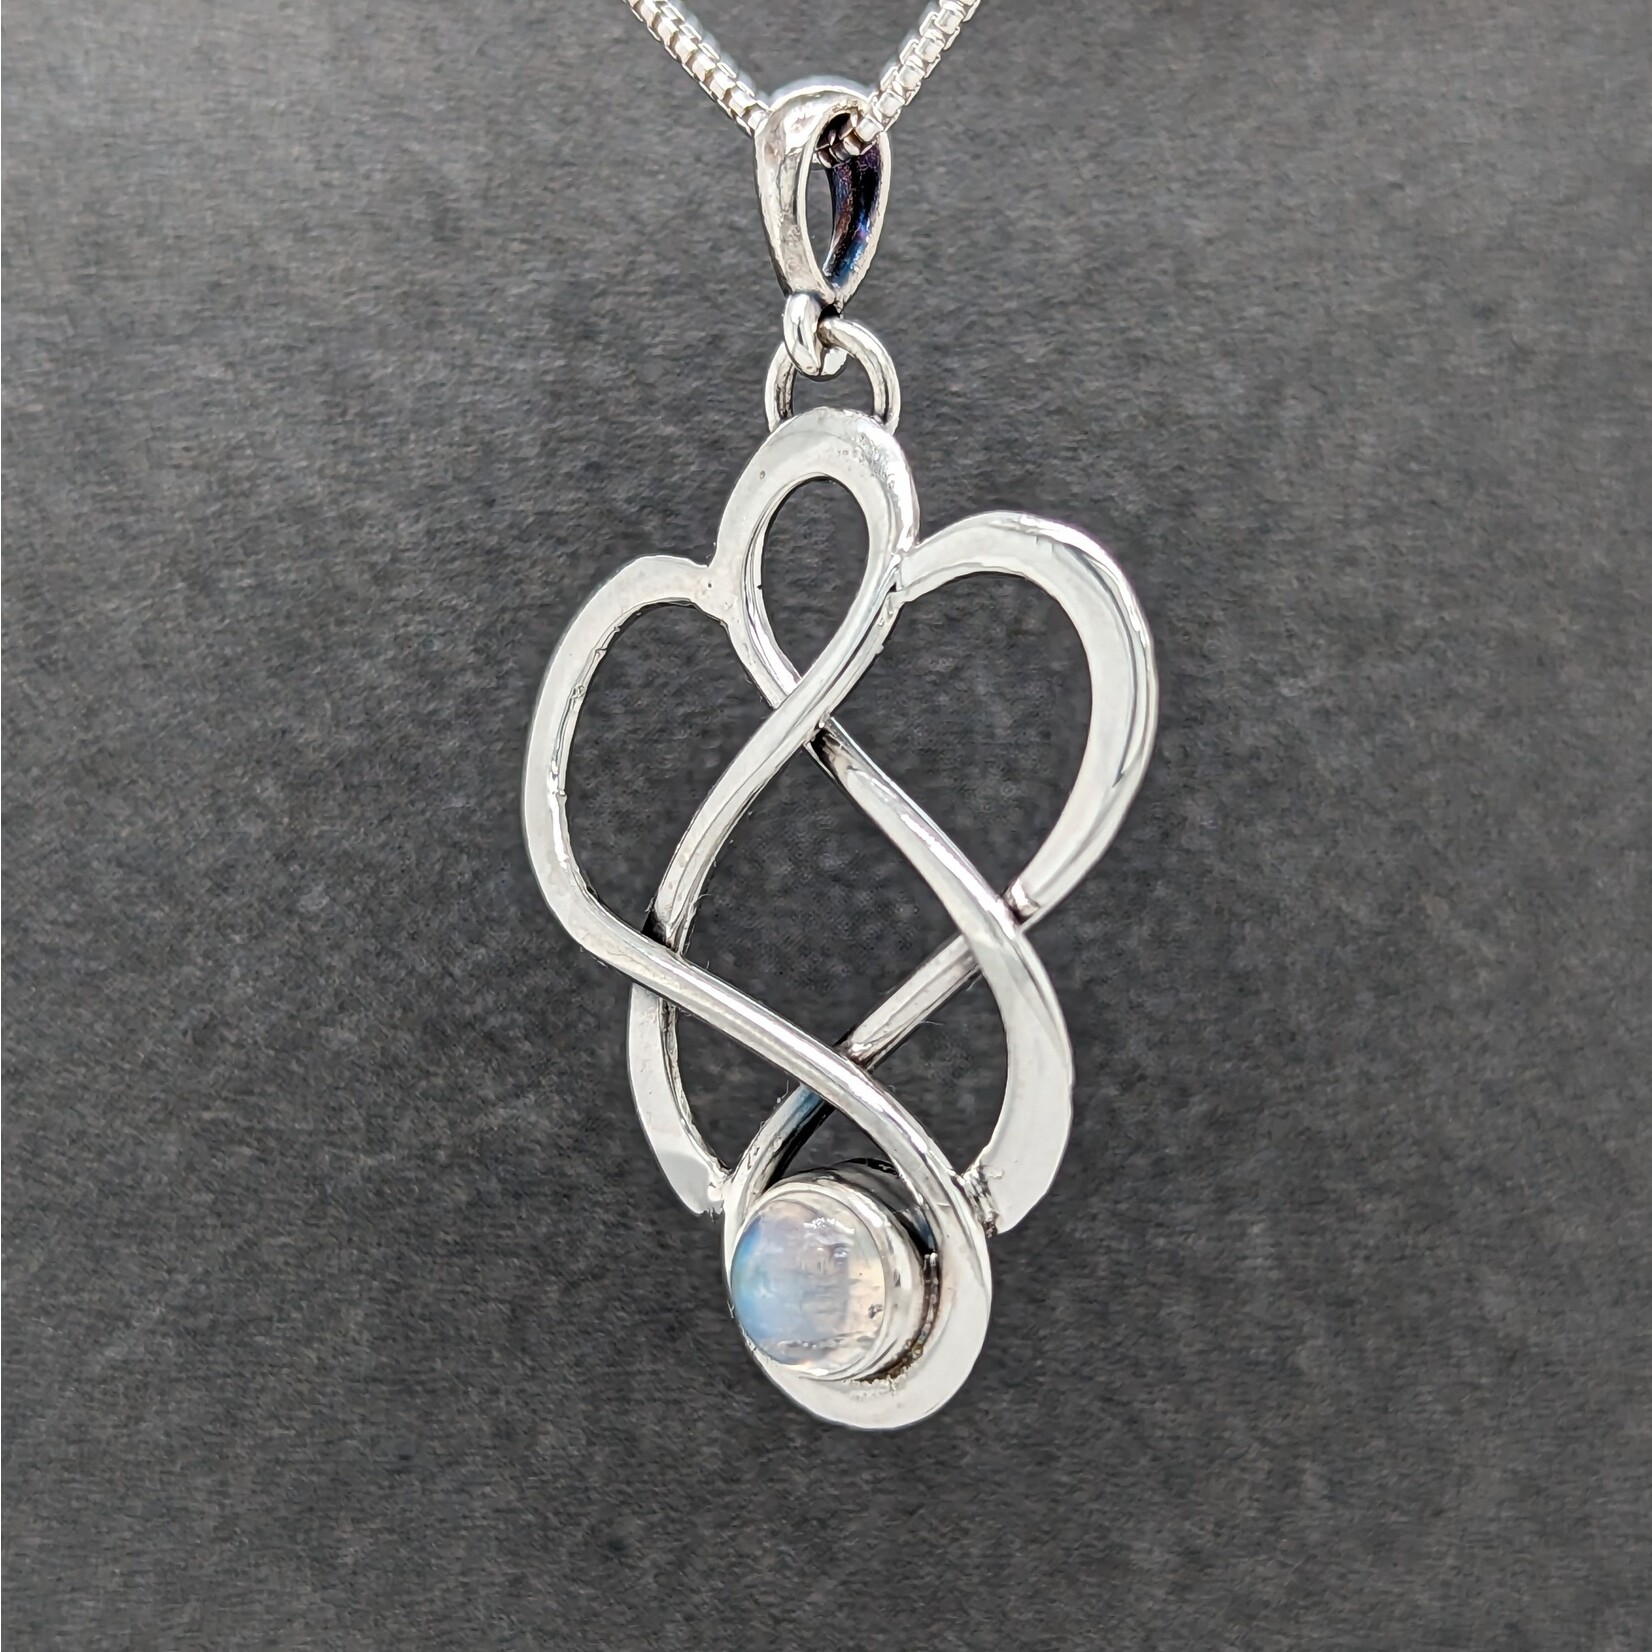 Modern Heirloom® Intertwined Nouveau 7mm Moonstone Necklace